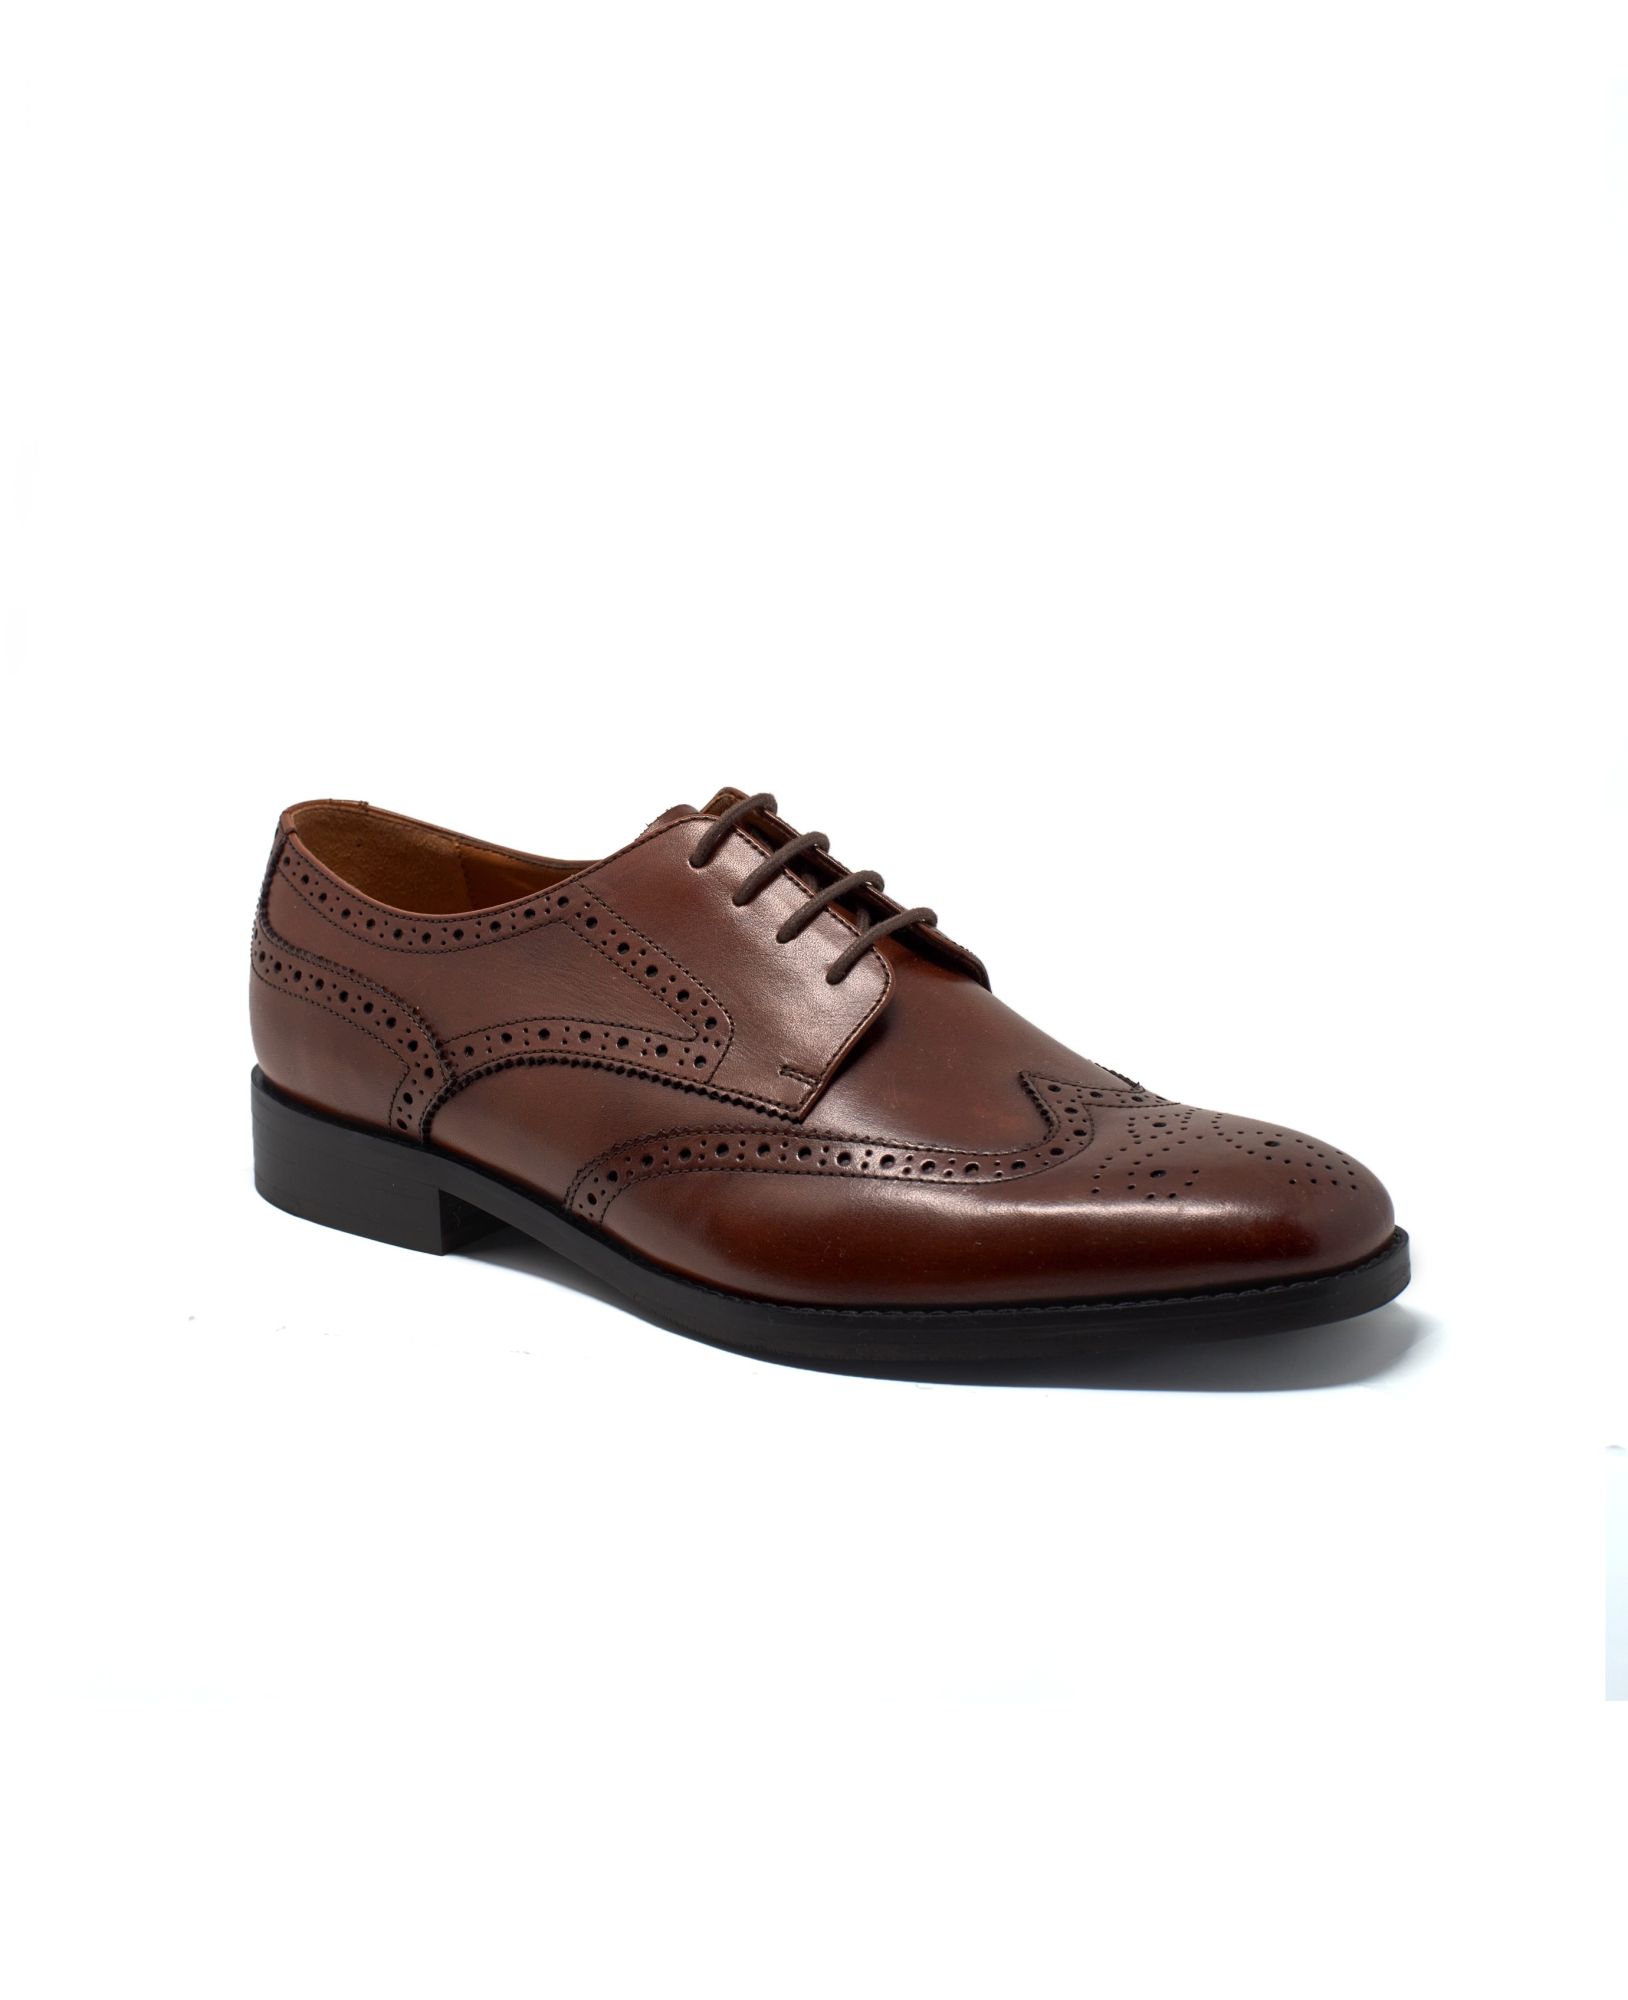 Chocolate Brown Leather Derby Shoes With Brogue Detailing 9